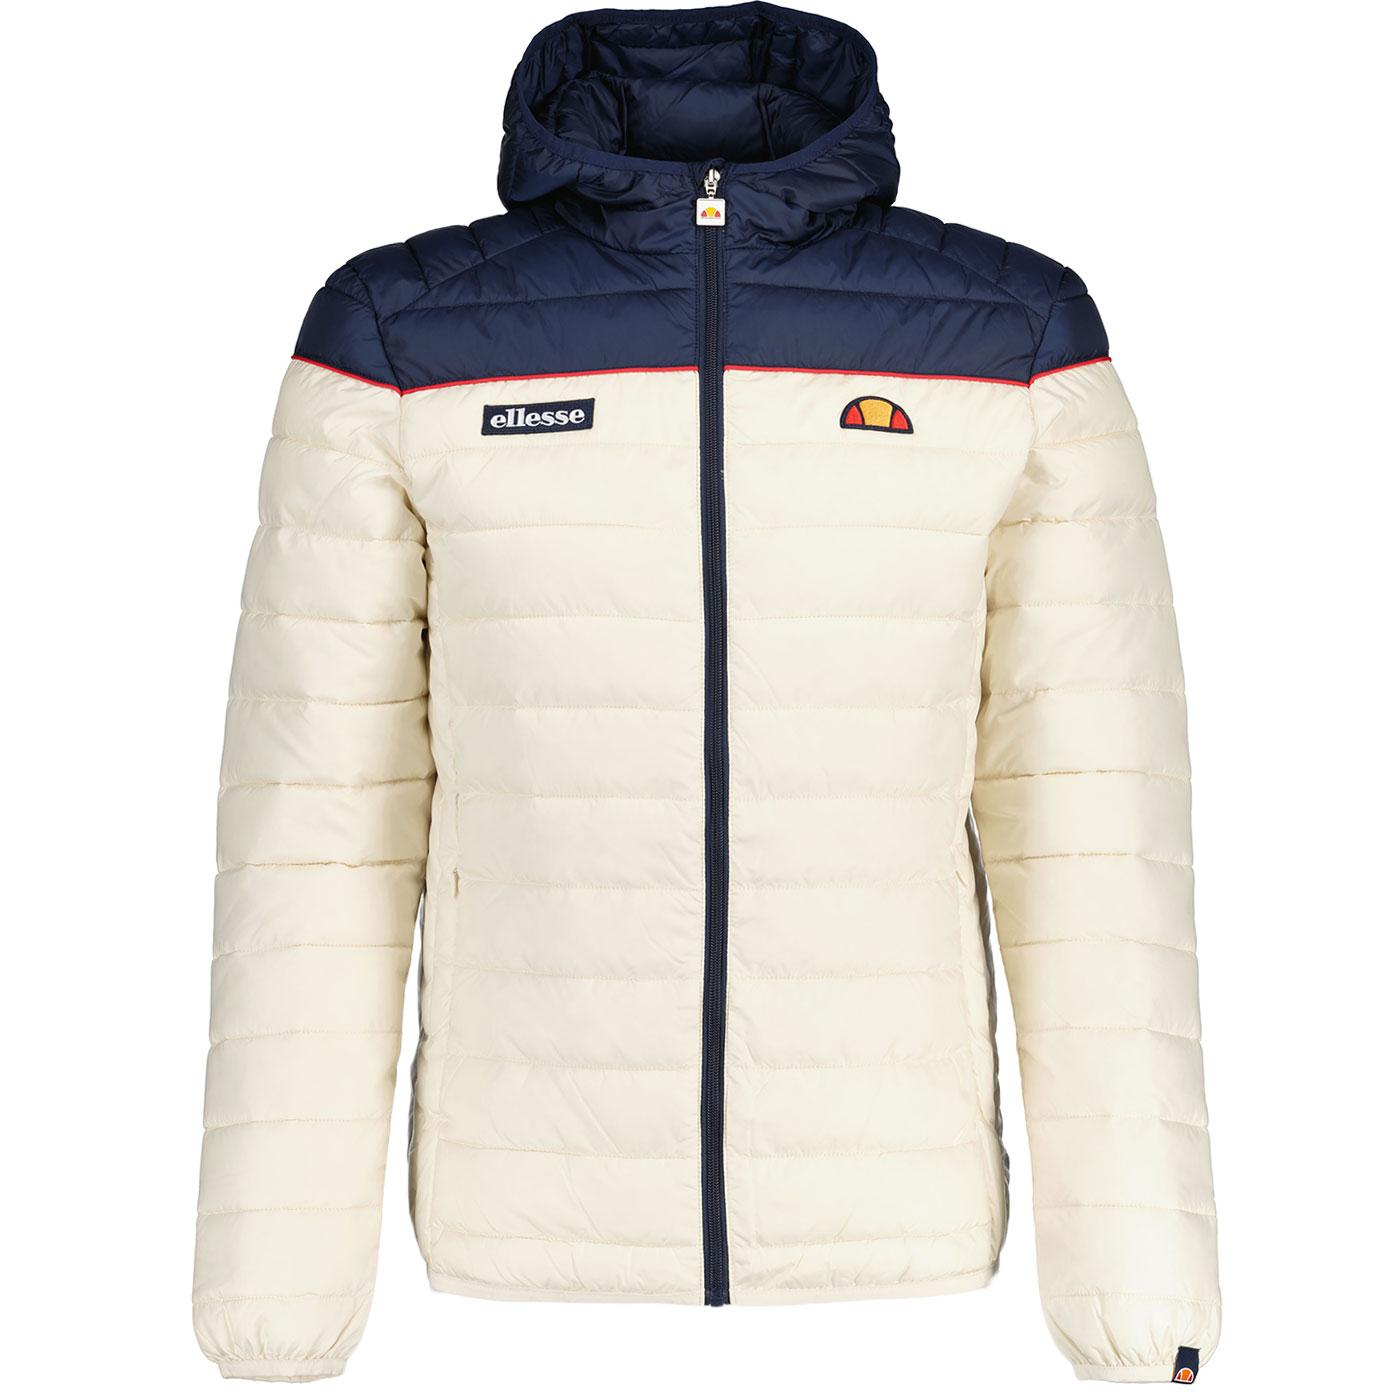 Ellesse Lombardy 2 Padded Jacket-Navy/Off White